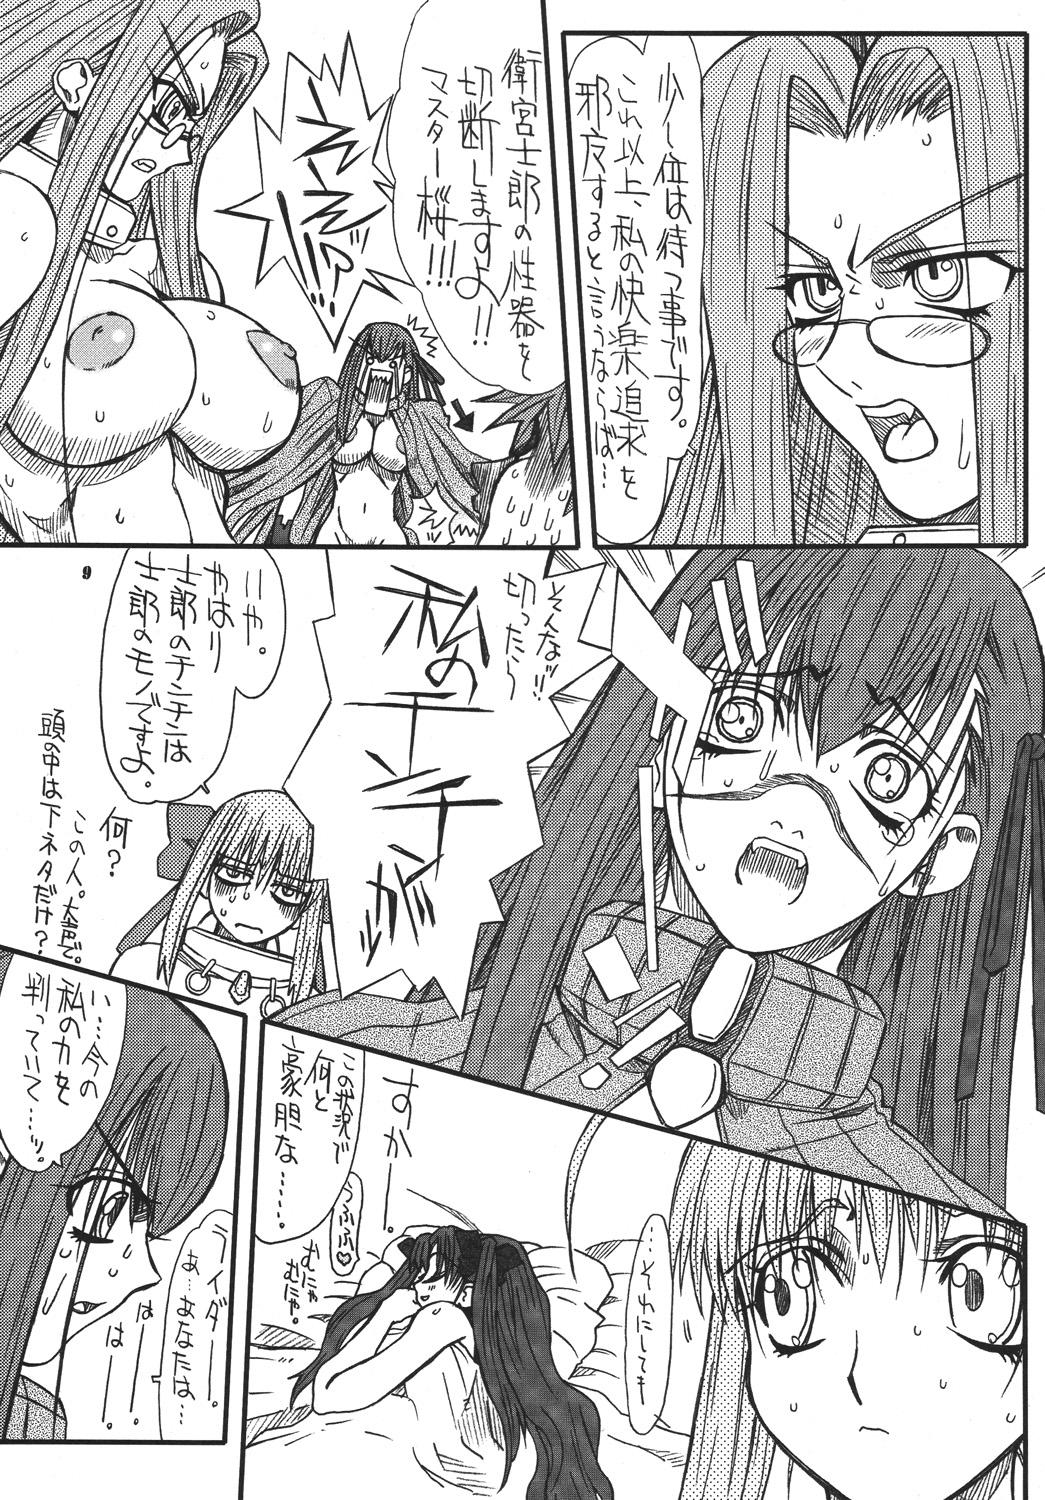 Mmf Akihime Yon - Fate stay night She - Page 8